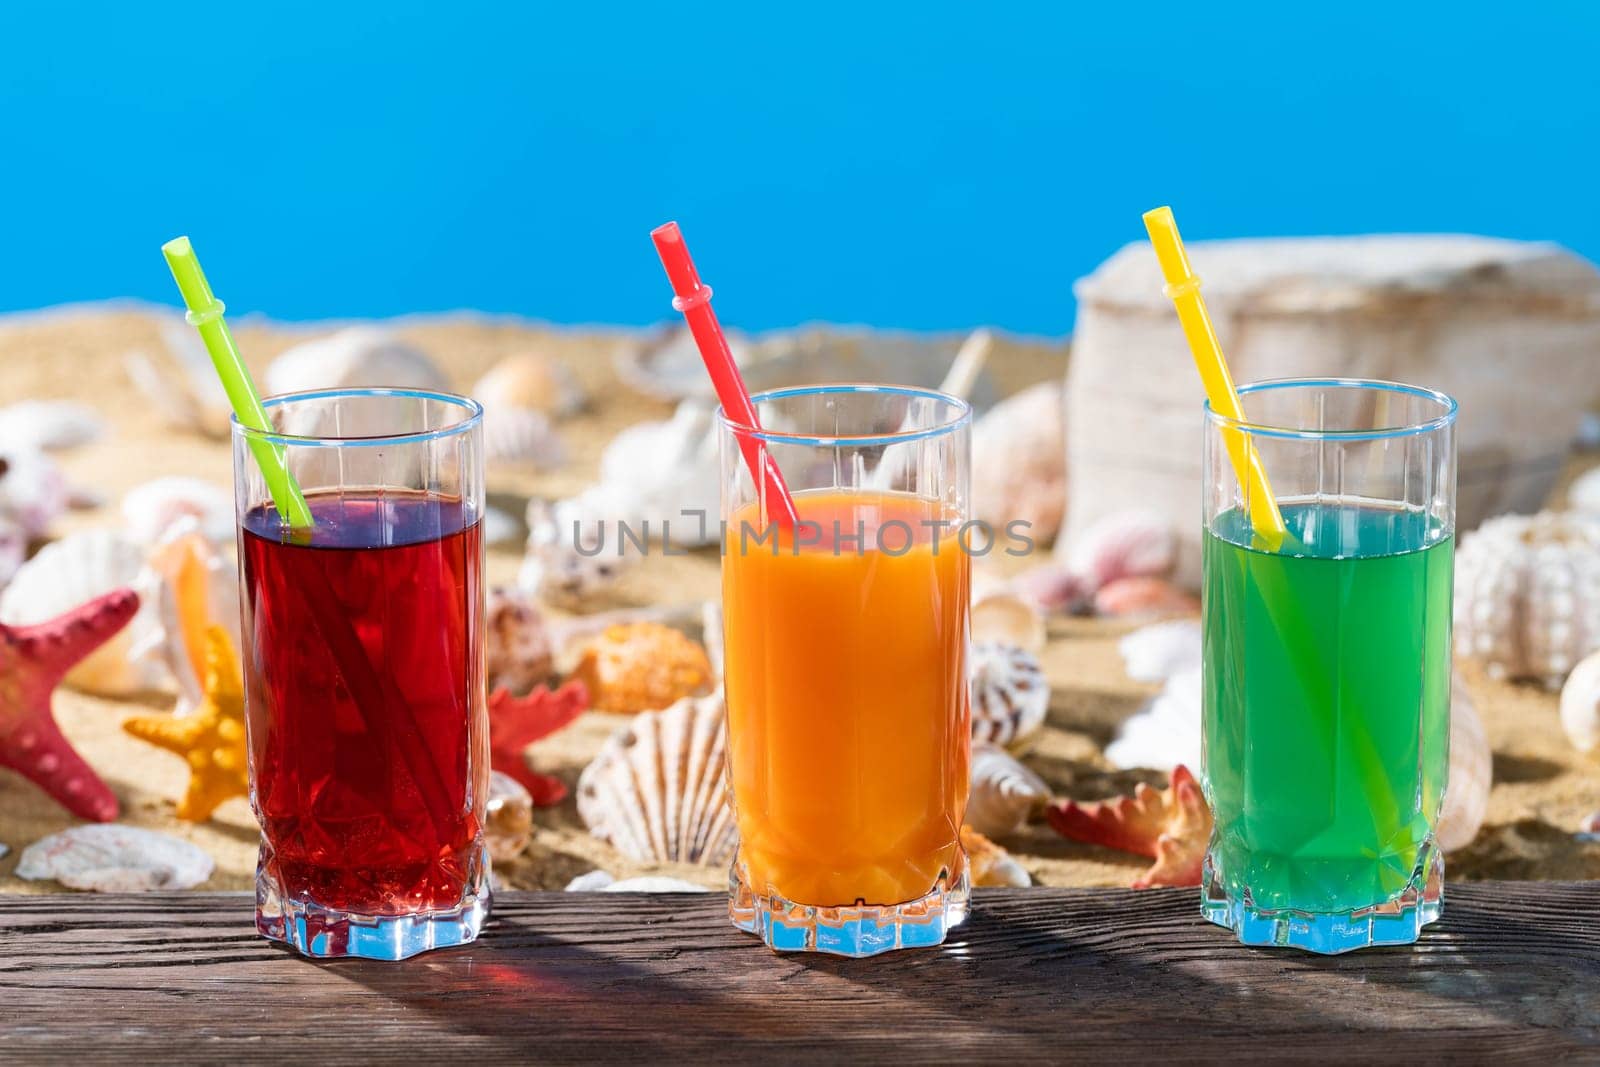 Fresh fruit juice in a tall glass. Shore of a sandy beach on a cool sea.